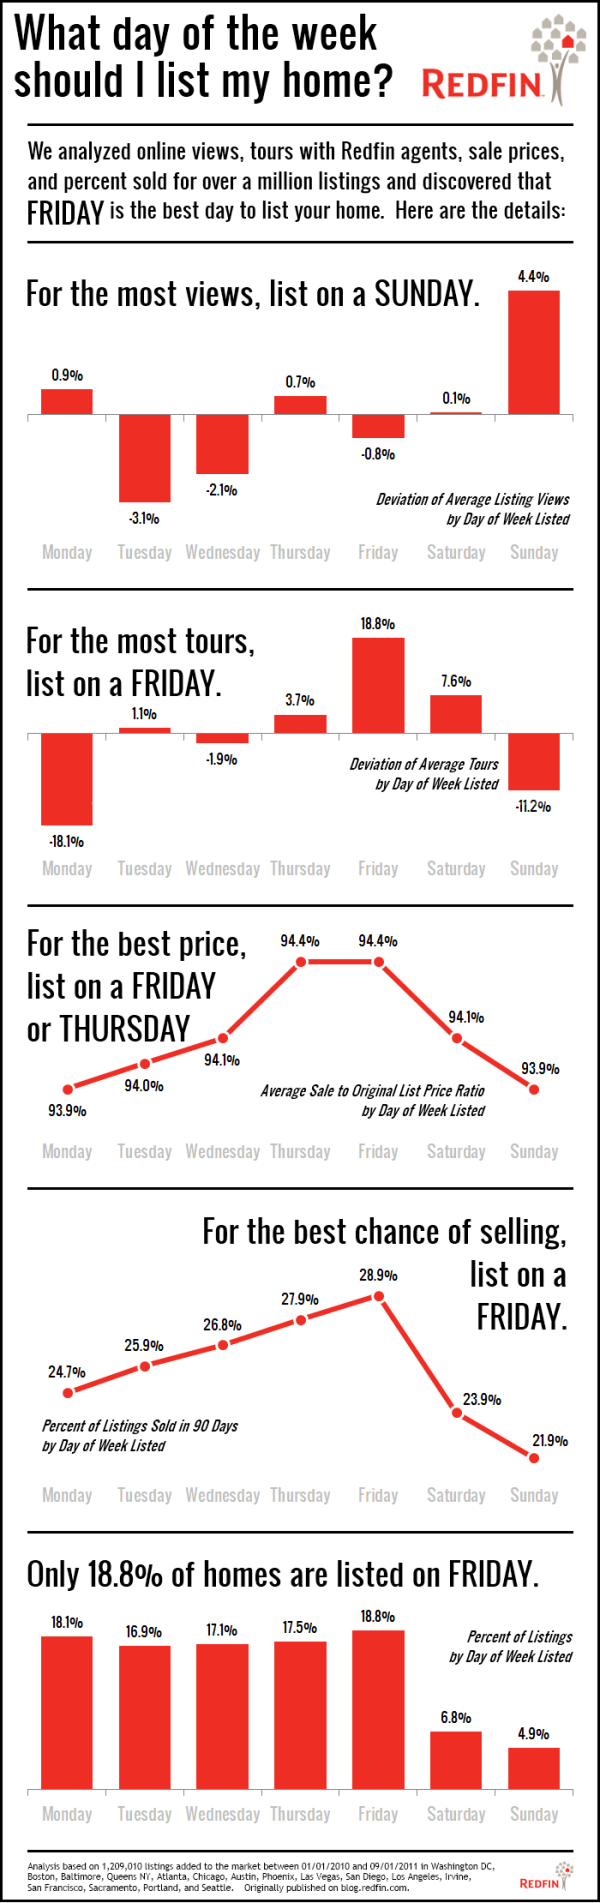 Redfin Blog: What day of the week should I list my home?